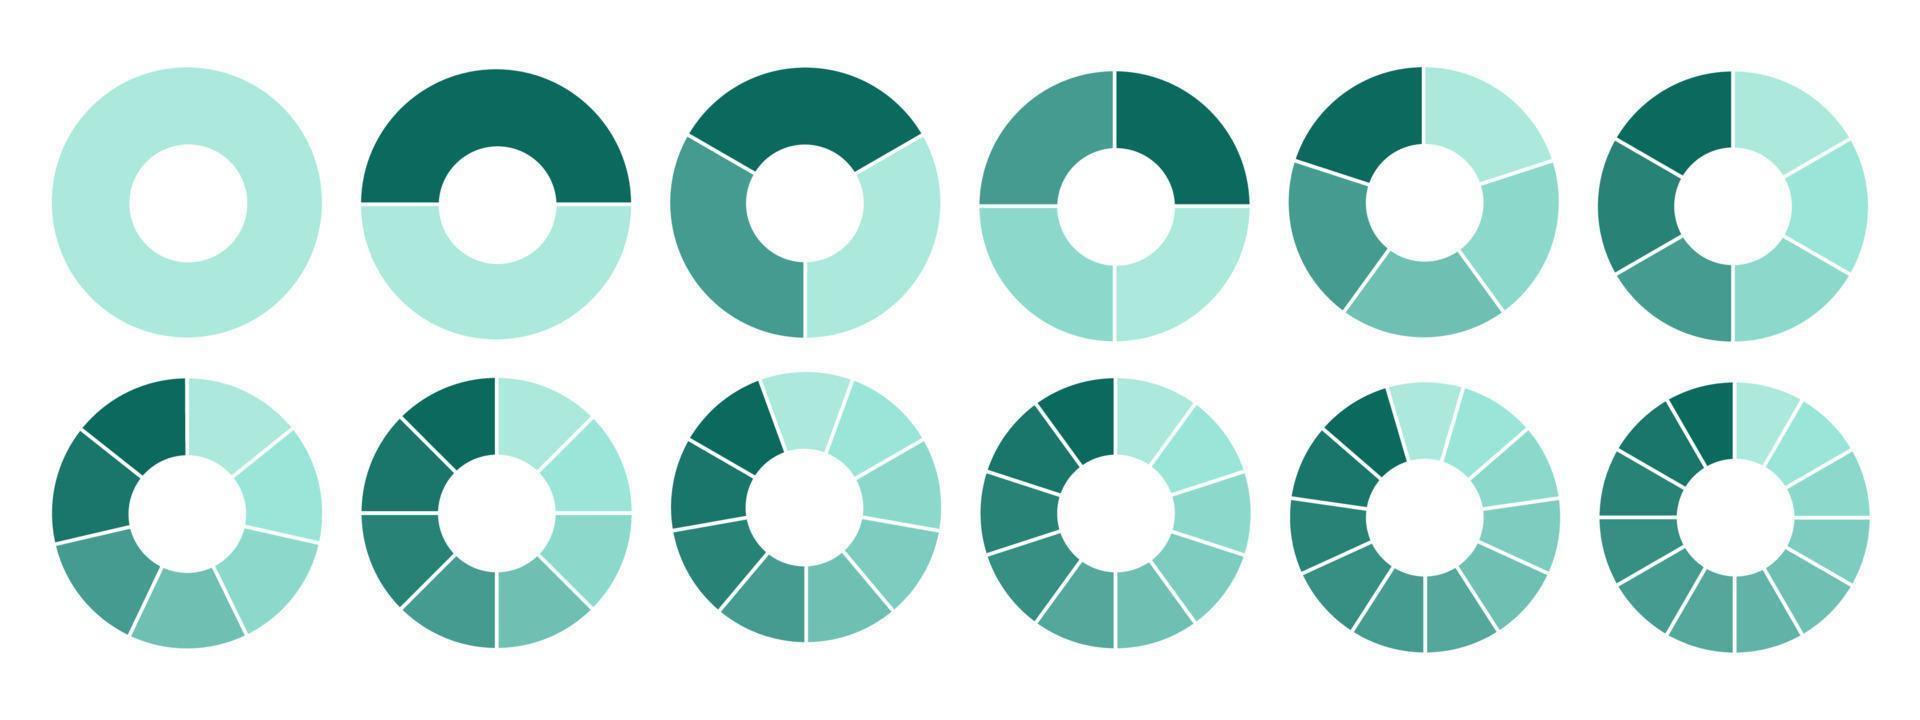 Set of segmented circles isolated on white background. A different number of sectors divides the circle into equal parts. vector